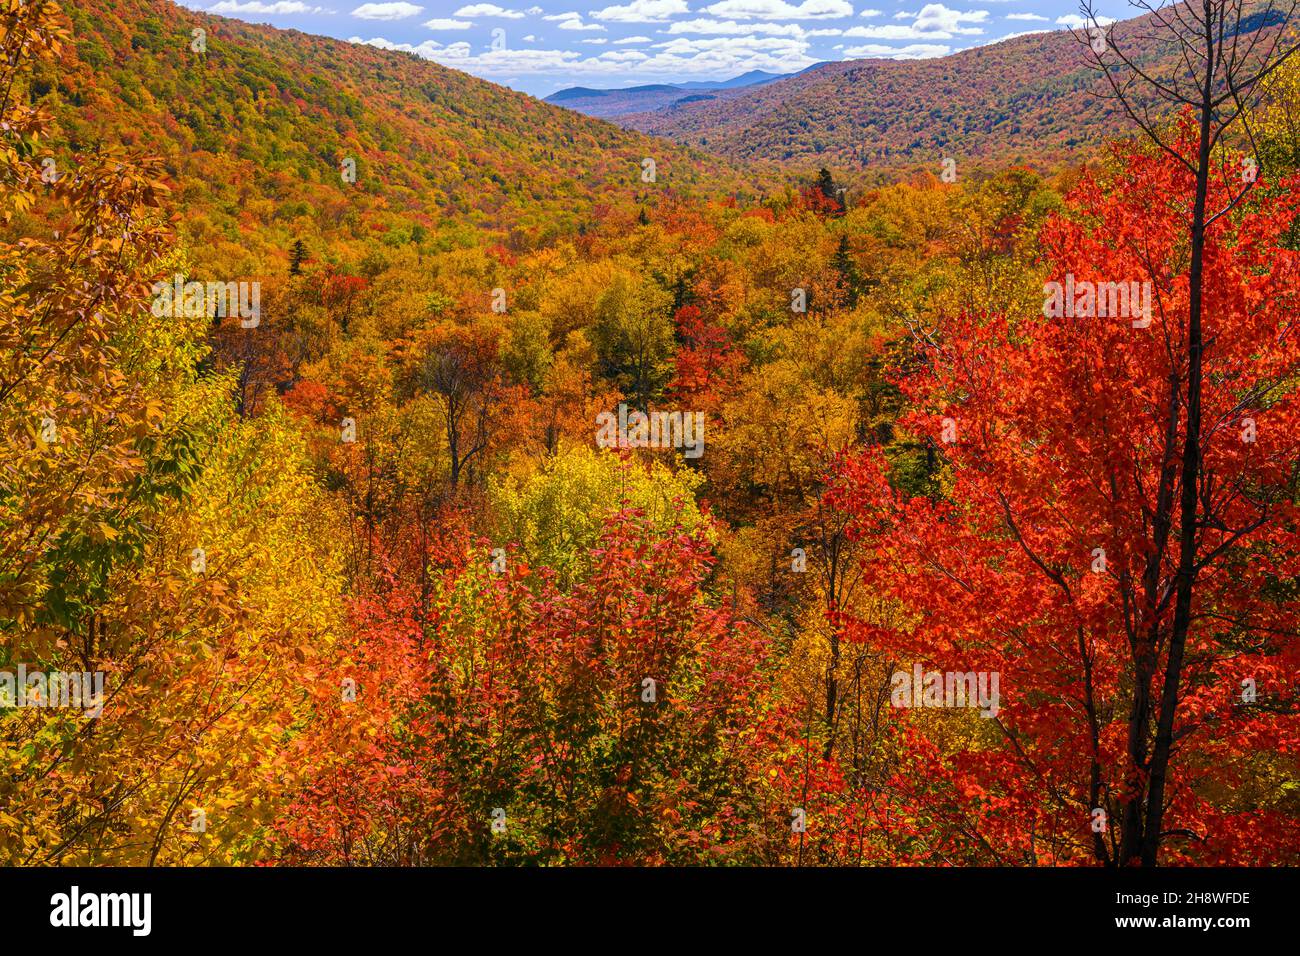 Autumn foliage in the deciduous forest on New England hillsides, Bear Notch Road, Bartlett, New Hampshire, USA Stock Photo